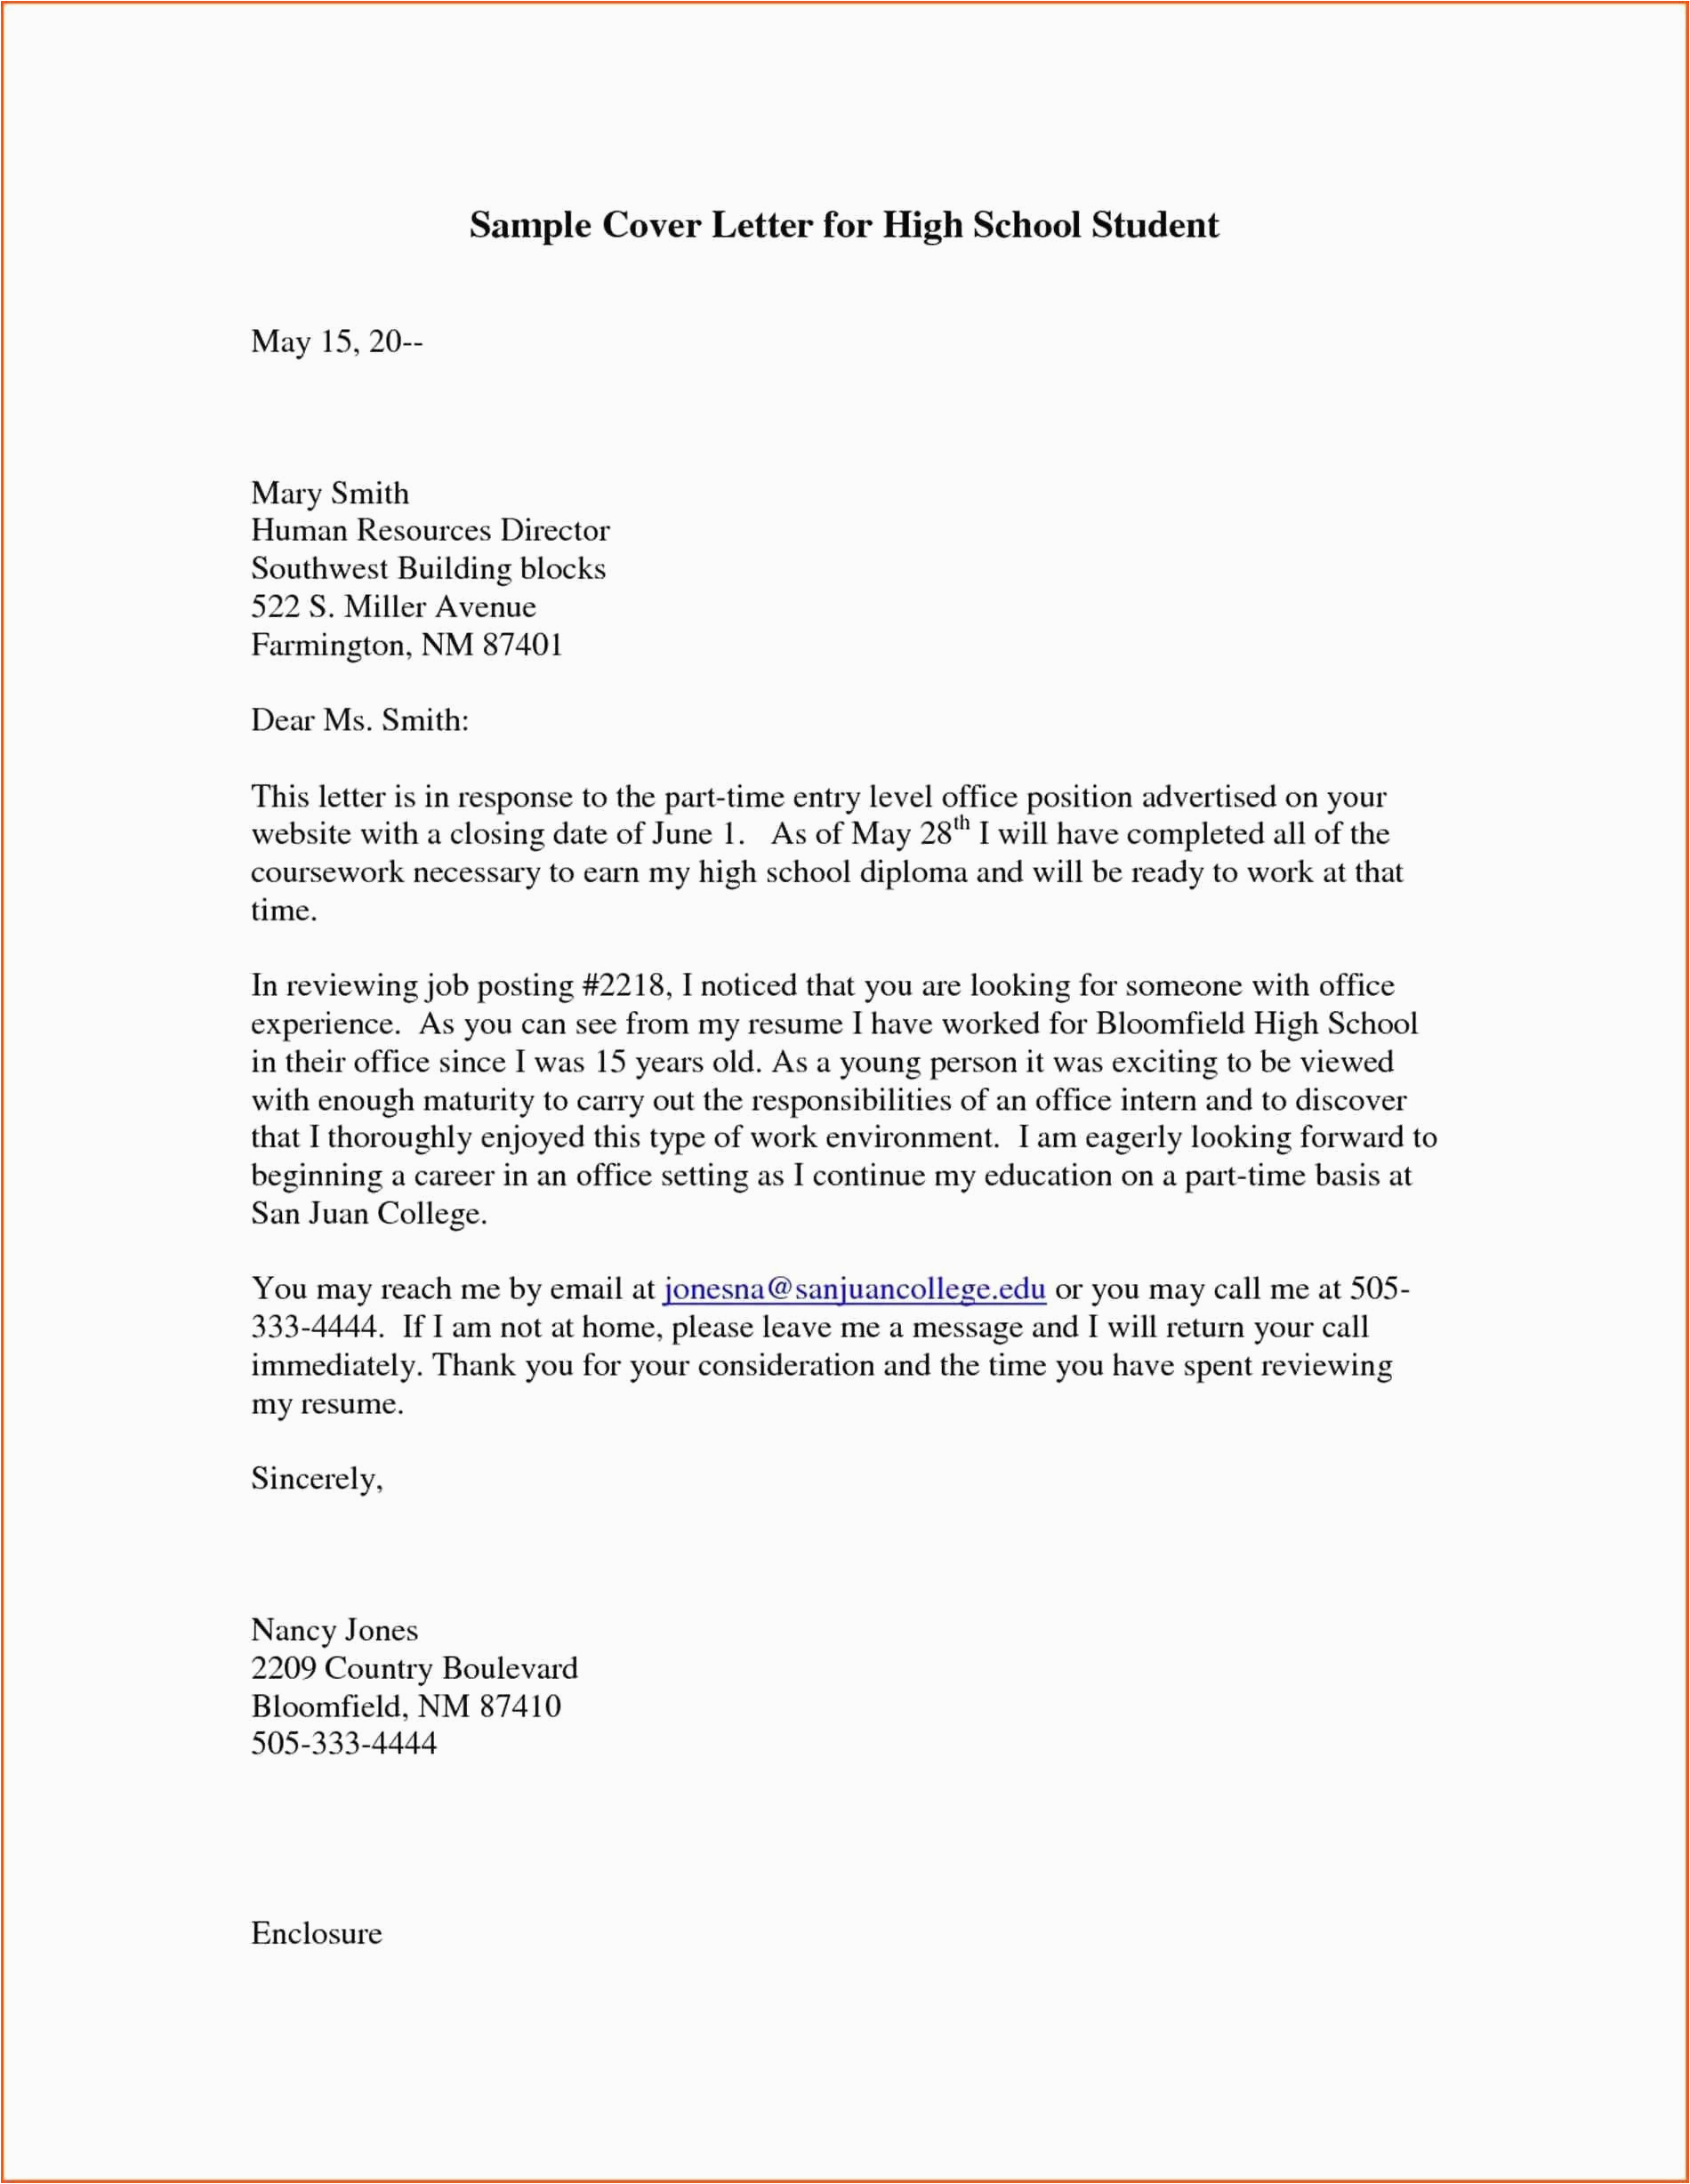 Sample Cover Letter and Resume for High School Student Student Resume Cover Letter Examples